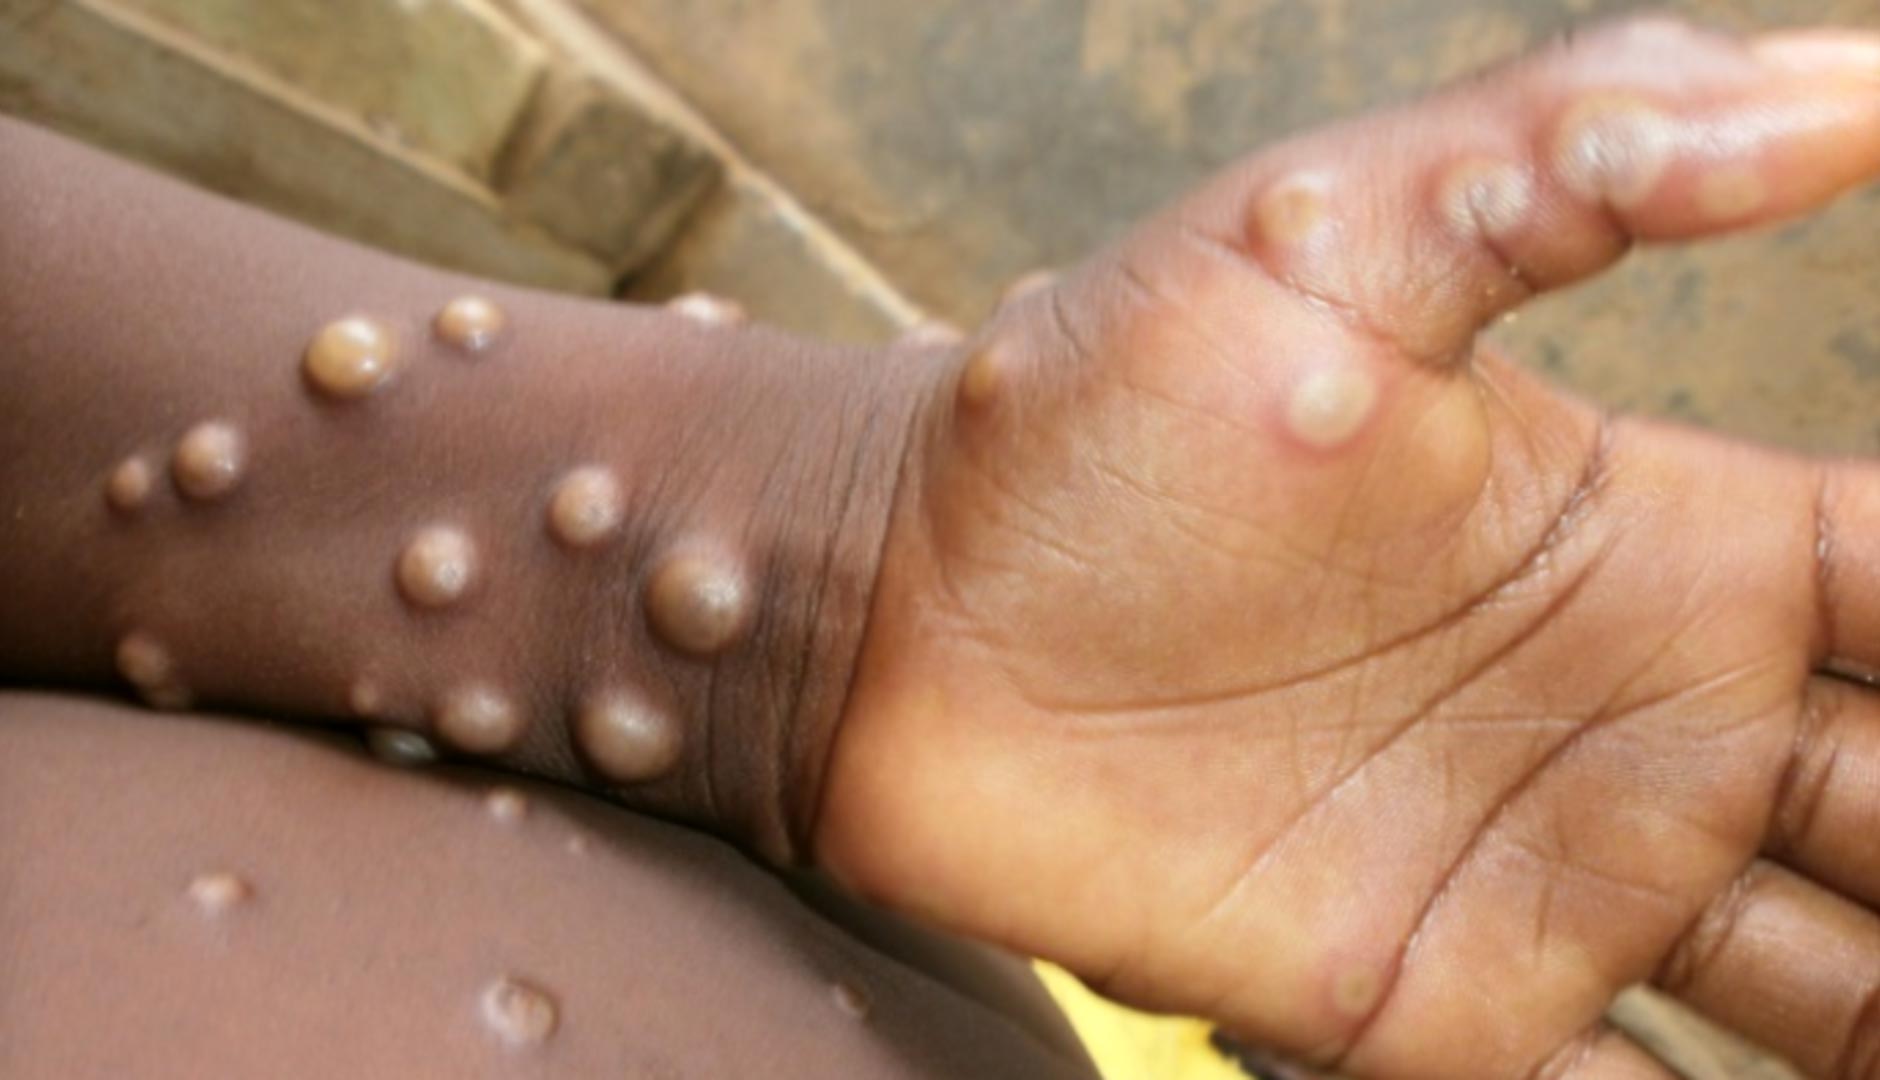 What Are the Symptoms of the Monkeypox?